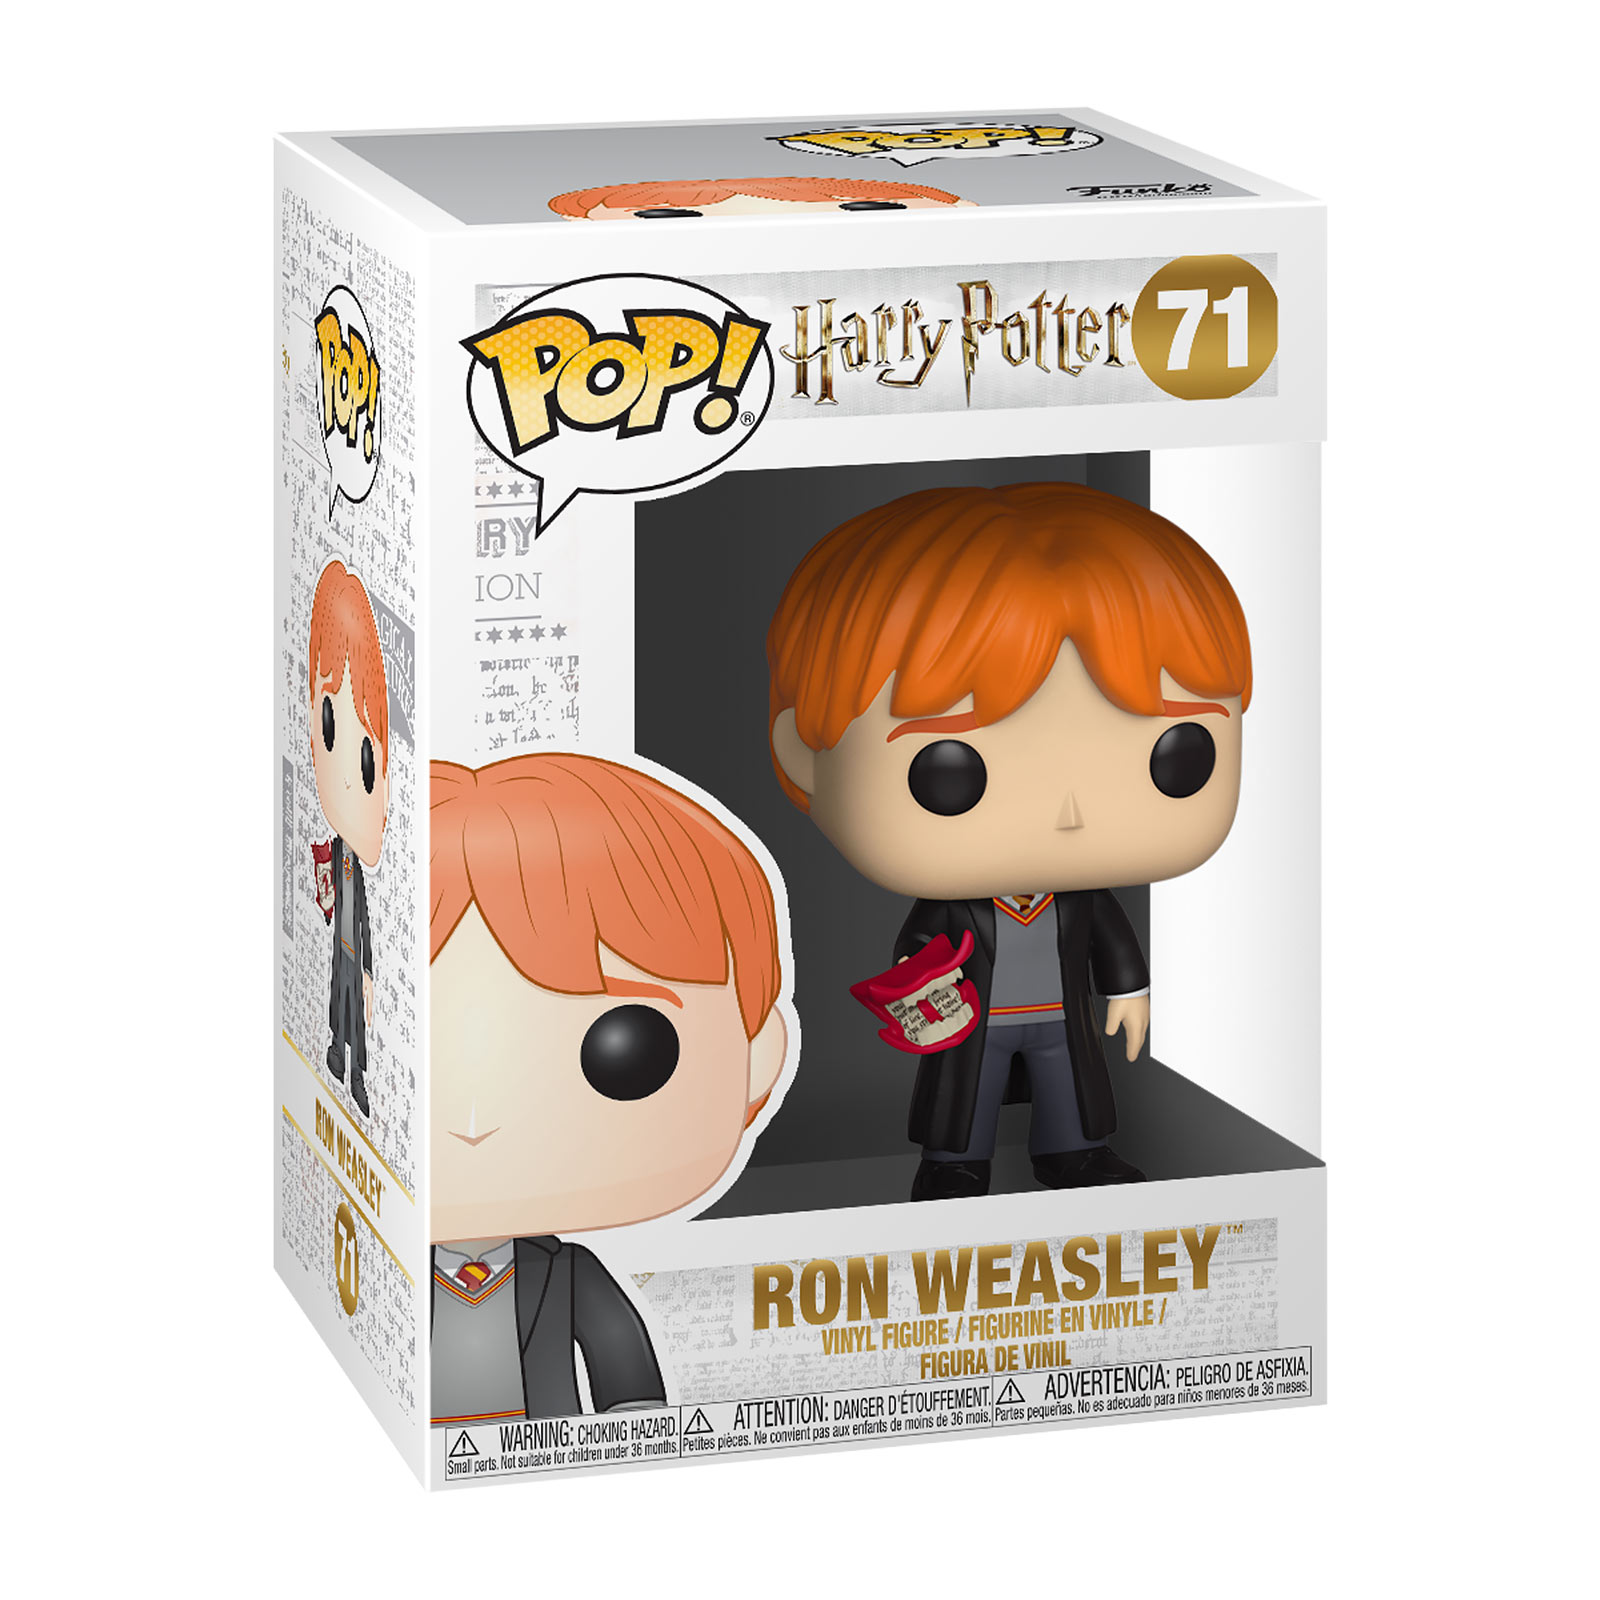 Harry Potter - Ron with Howler Funko Pop Figurine